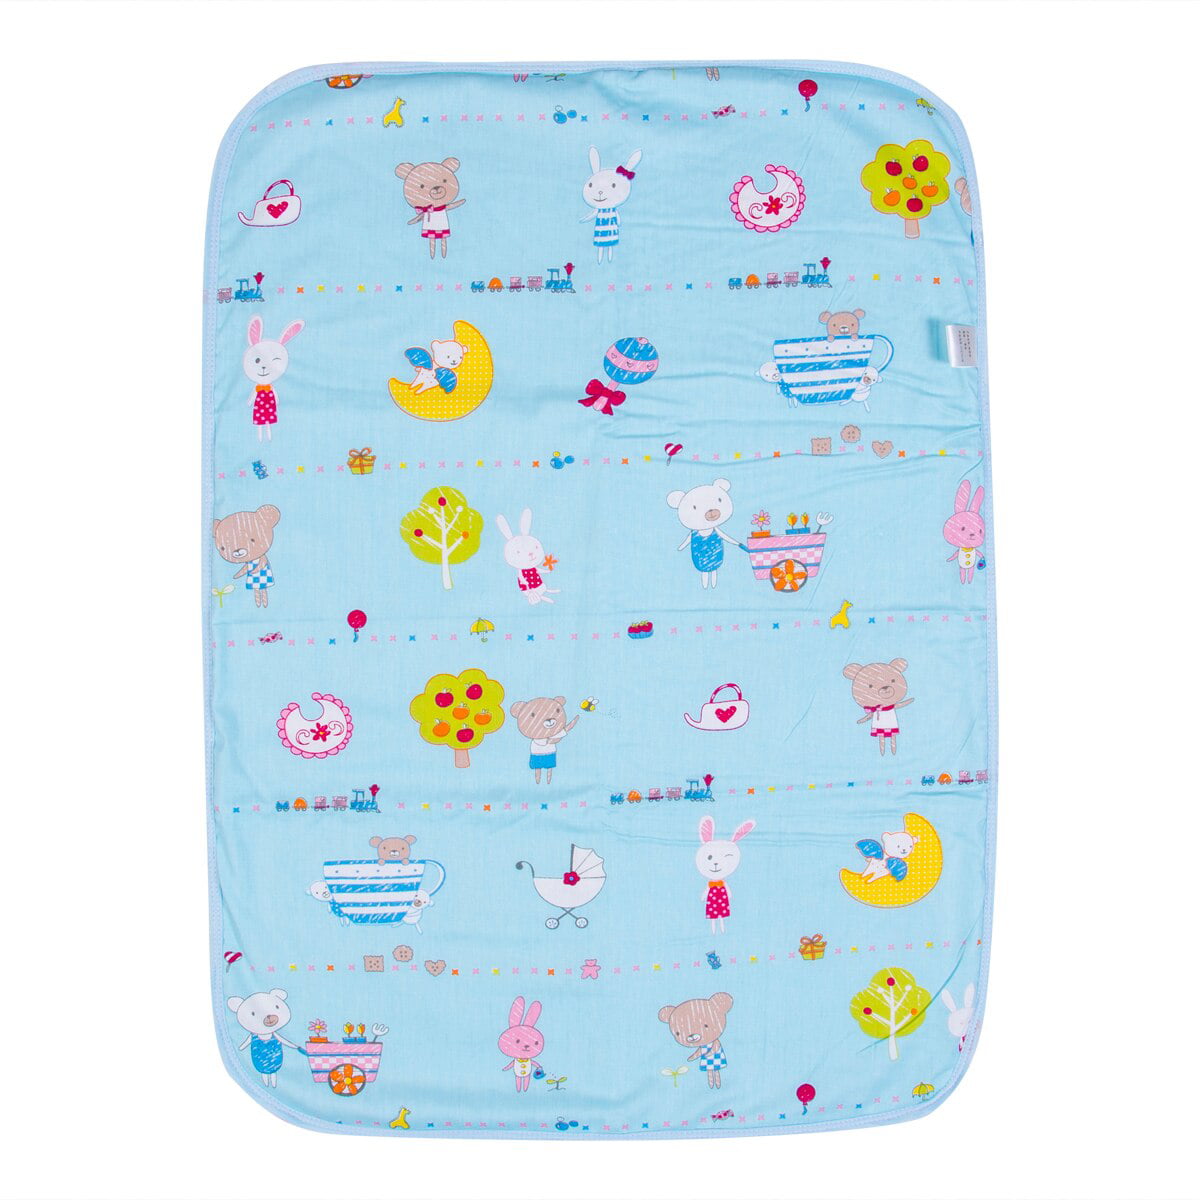 Baby Infant Diaper Nappy Urine Mat Kid Waterproof Bedding Changing Cover Pad  yN 